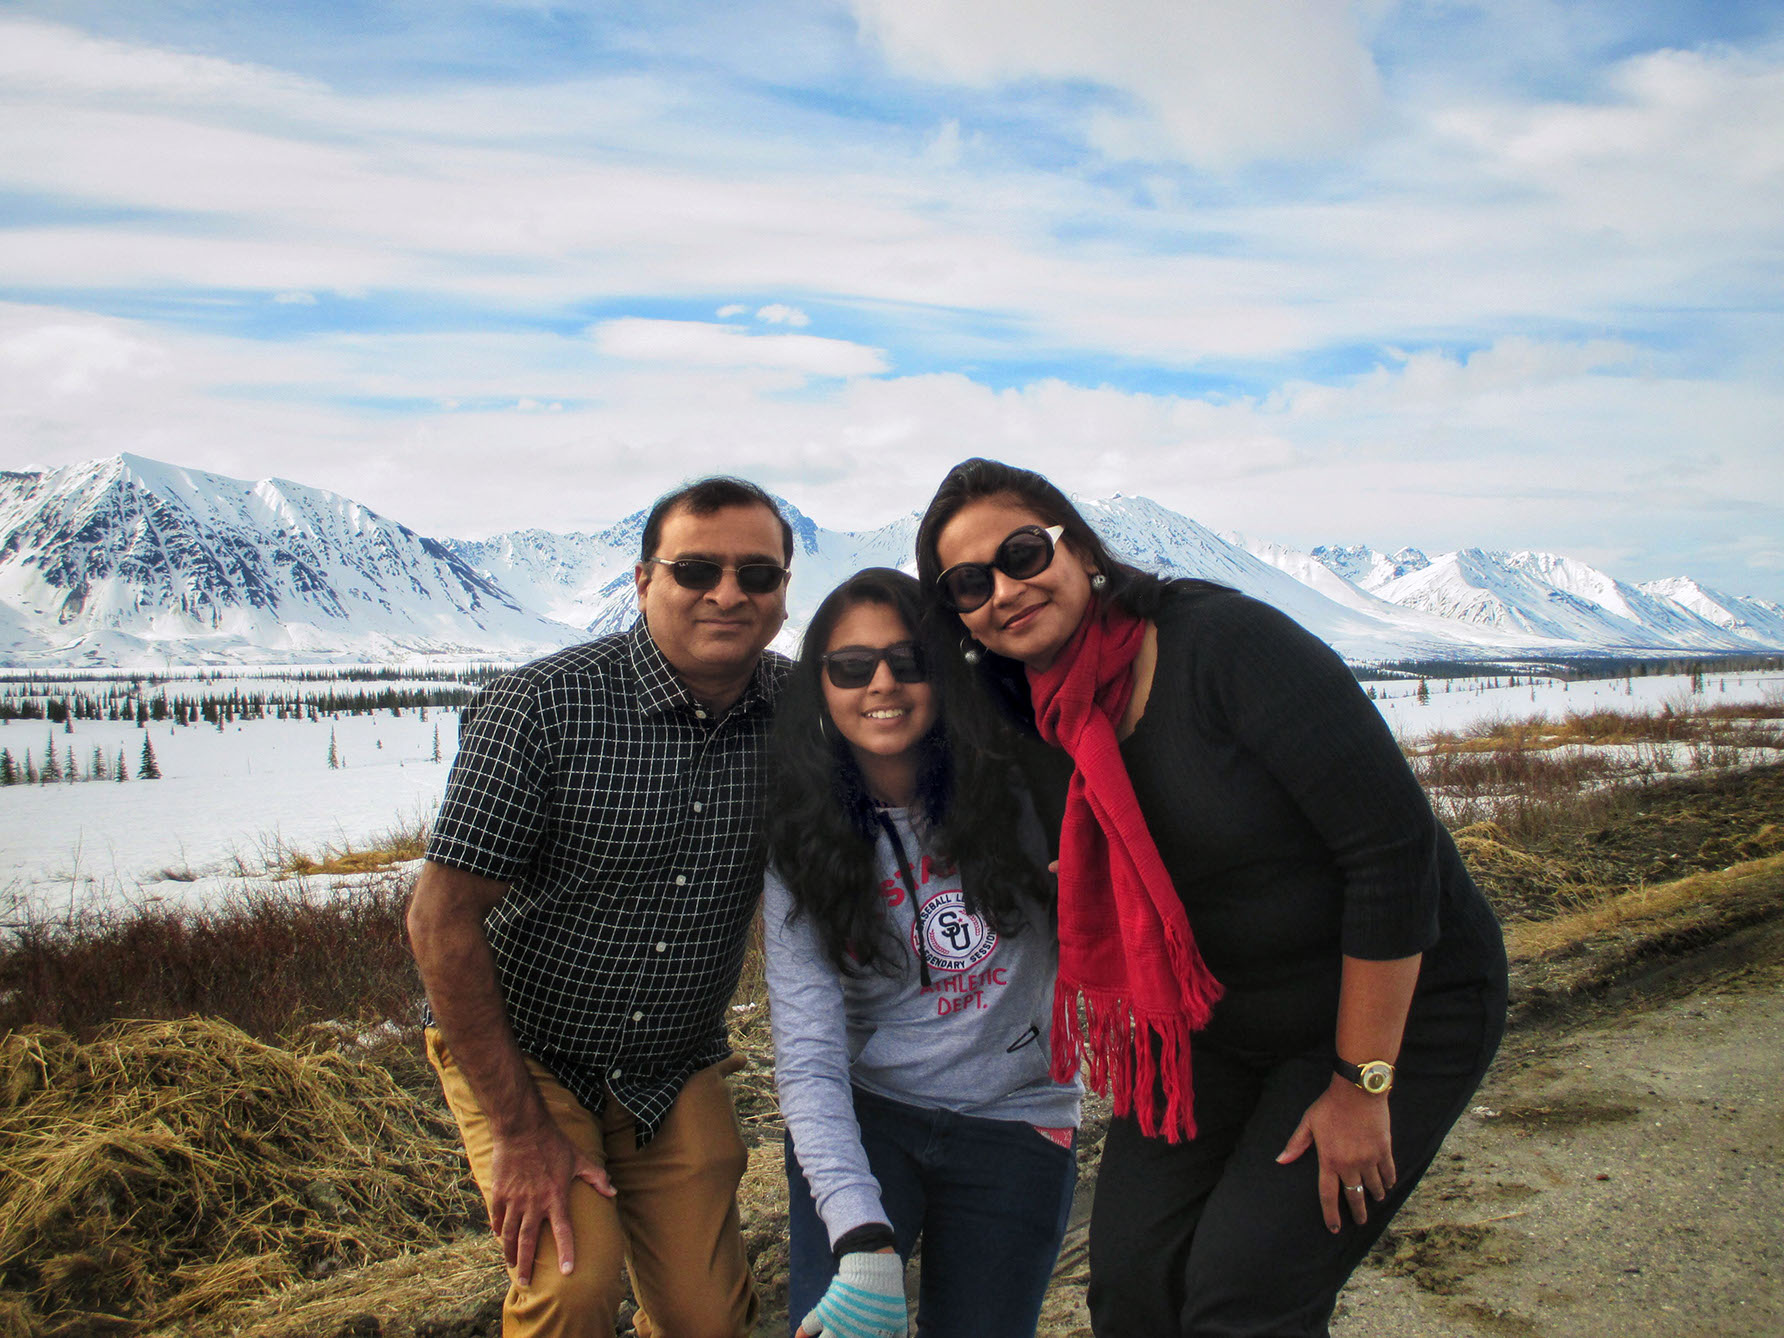 Family picture from highway of Denali National Park in Alaska